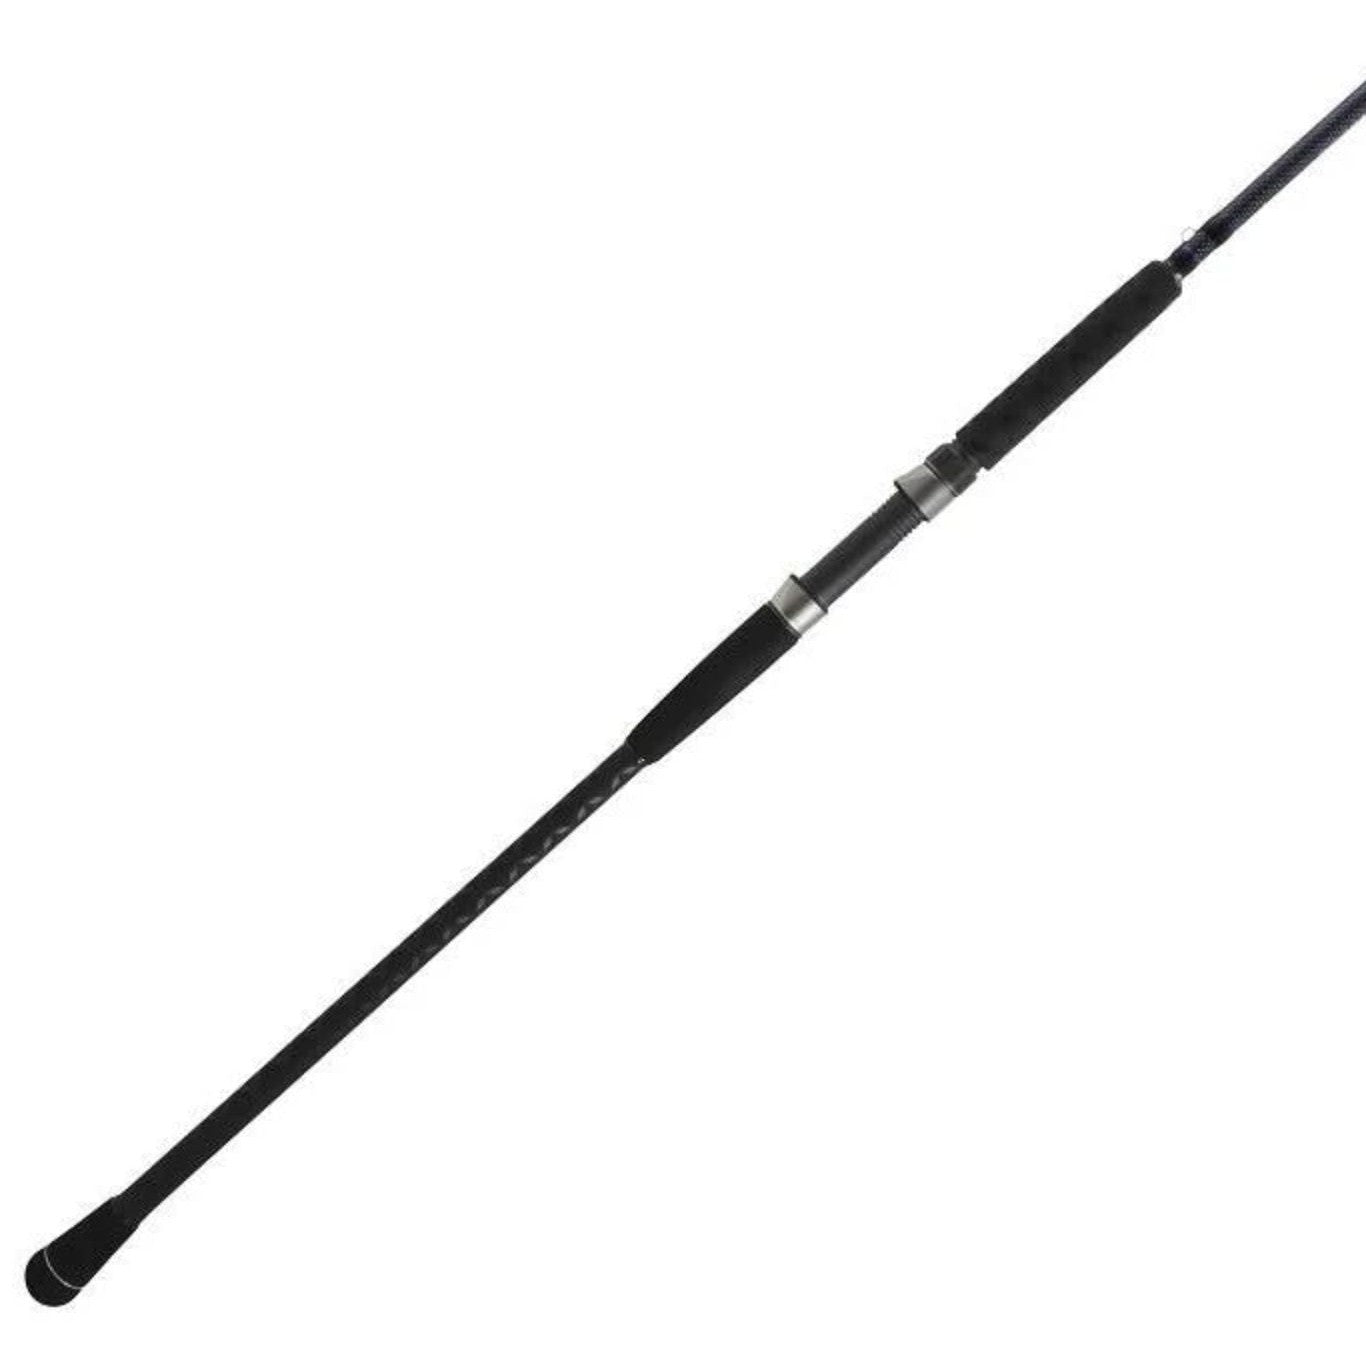 Rockaway Surf Saltwater Spinning Rod - 12' Length, 2pc, 12-25 lb Line Rate, 1-4 oz Lure Rate, Medium-Heavy Power